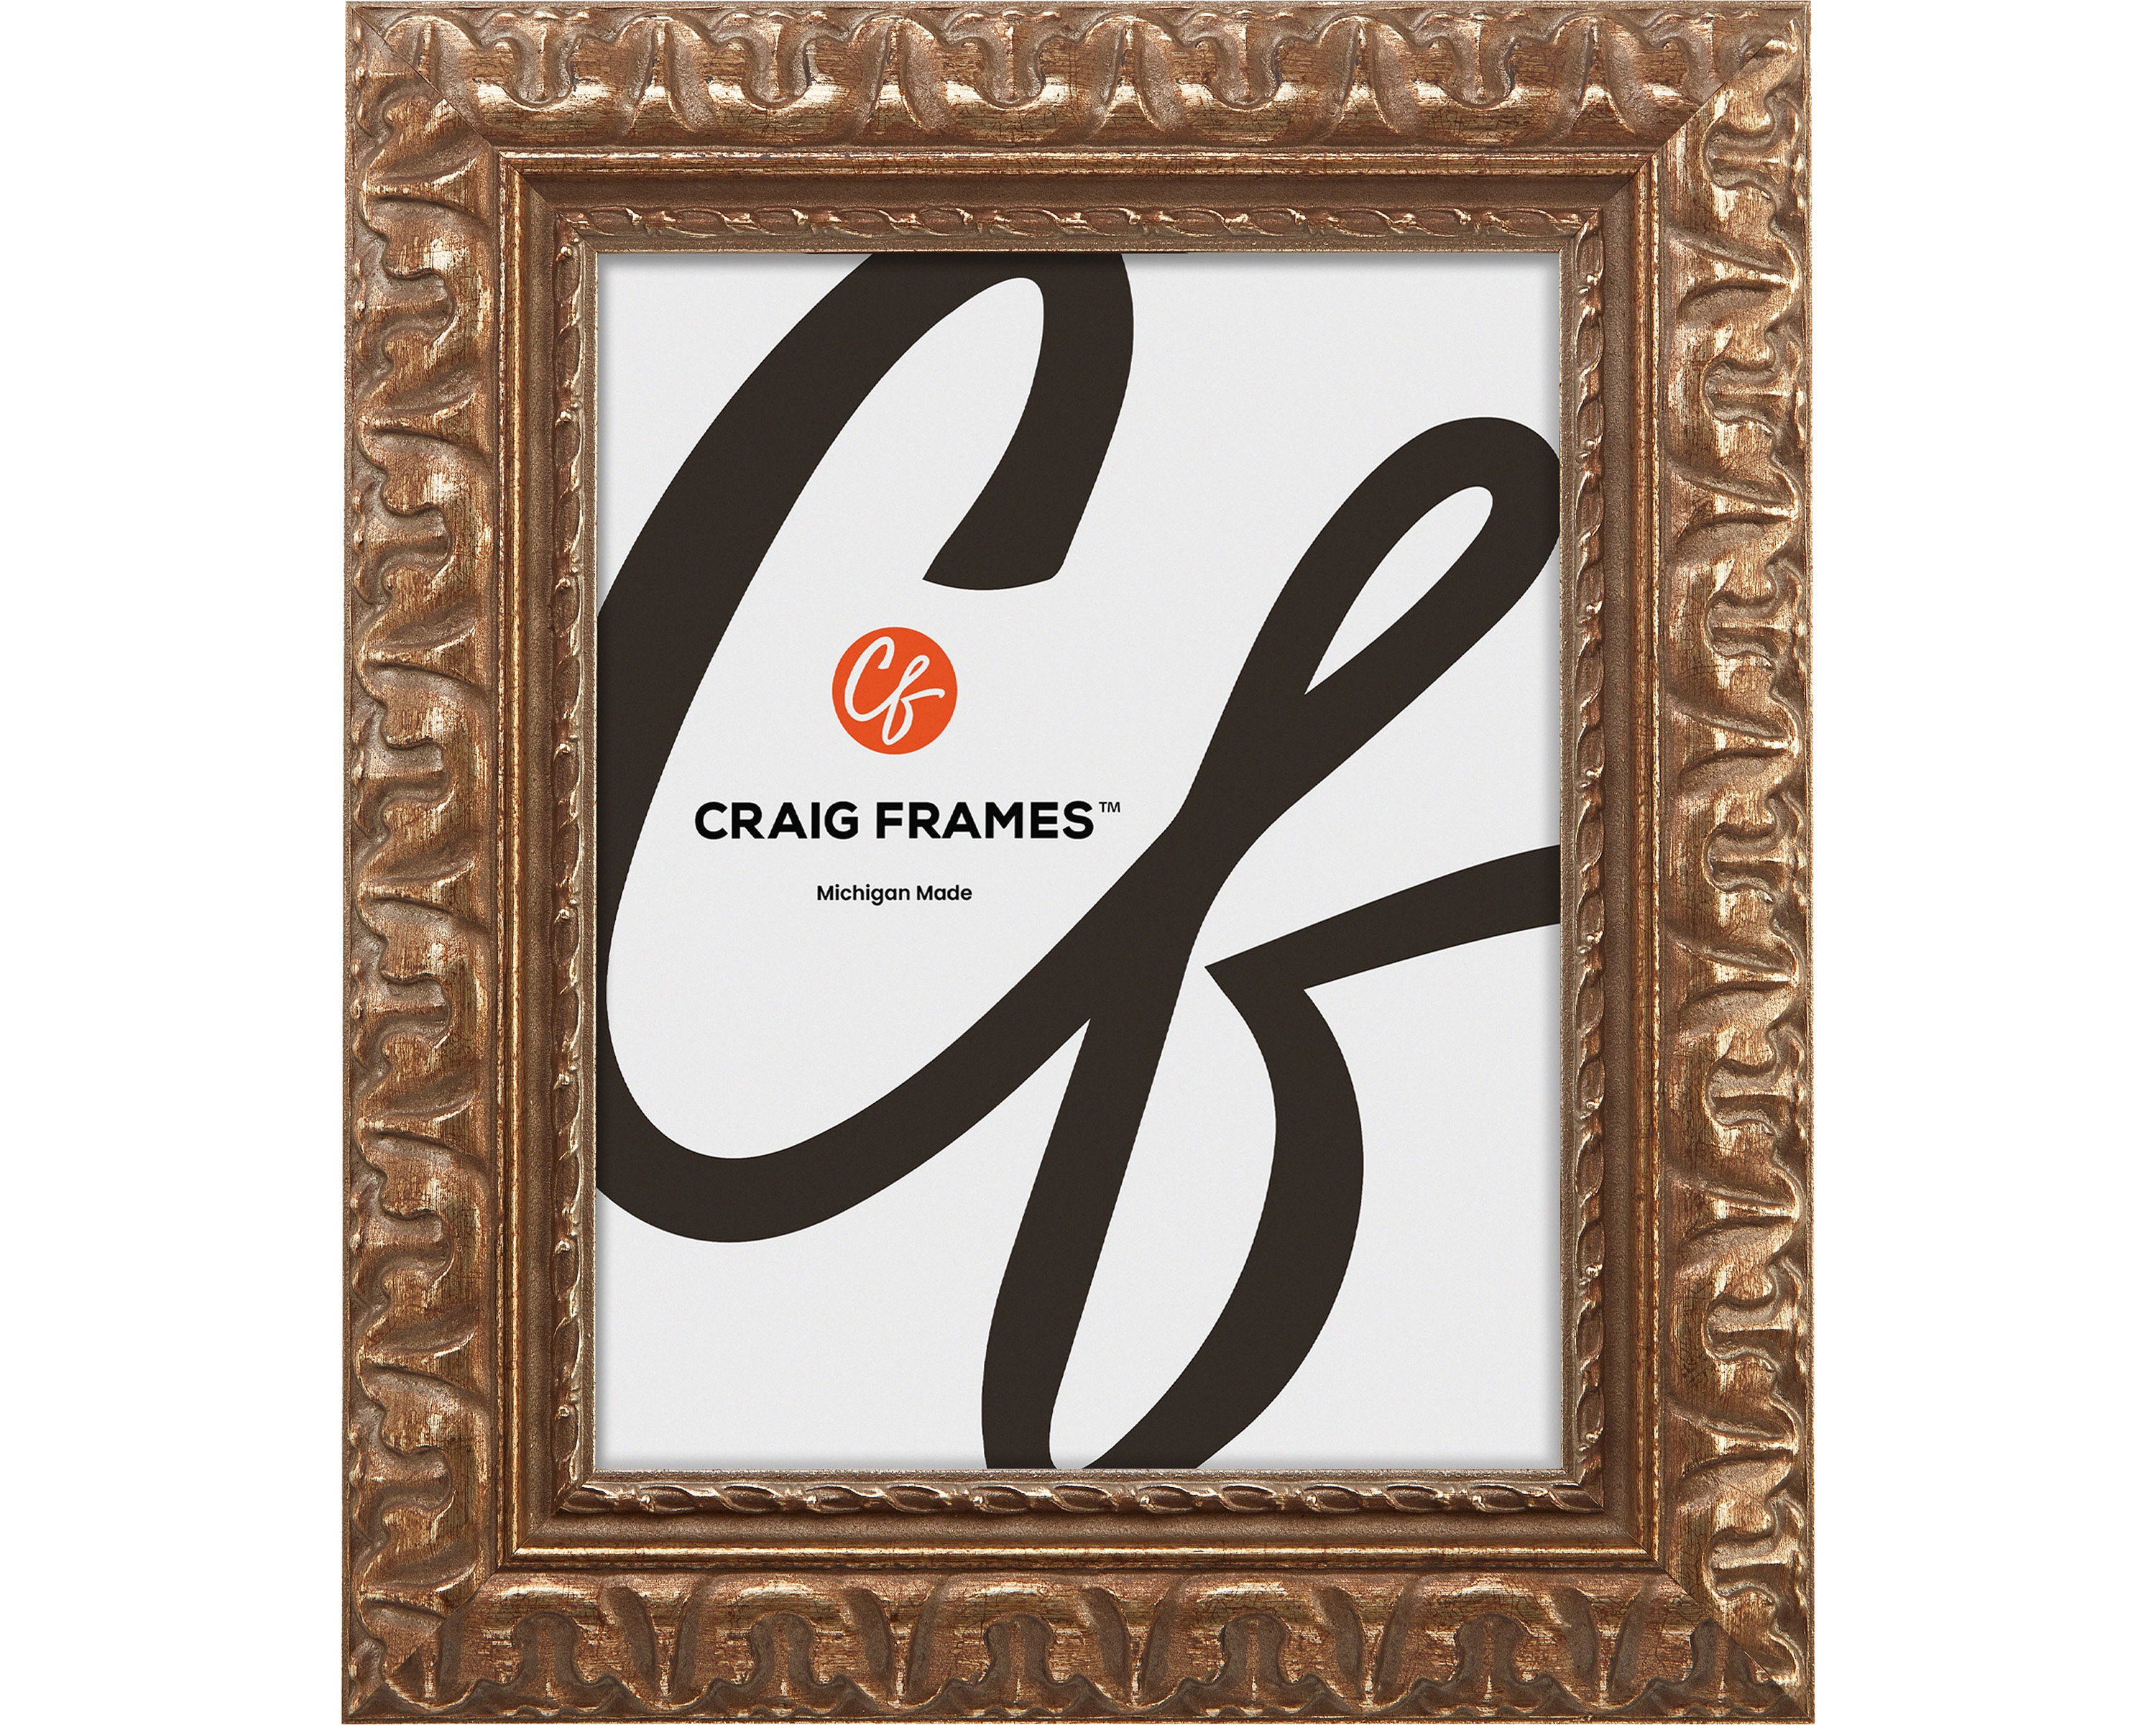 3-1/2 Polystyrene Classic 16x24 Picture Frame by Wholesaleartsframes-com.  1972 Series. Gold, Silver & Bronze Made in USA 